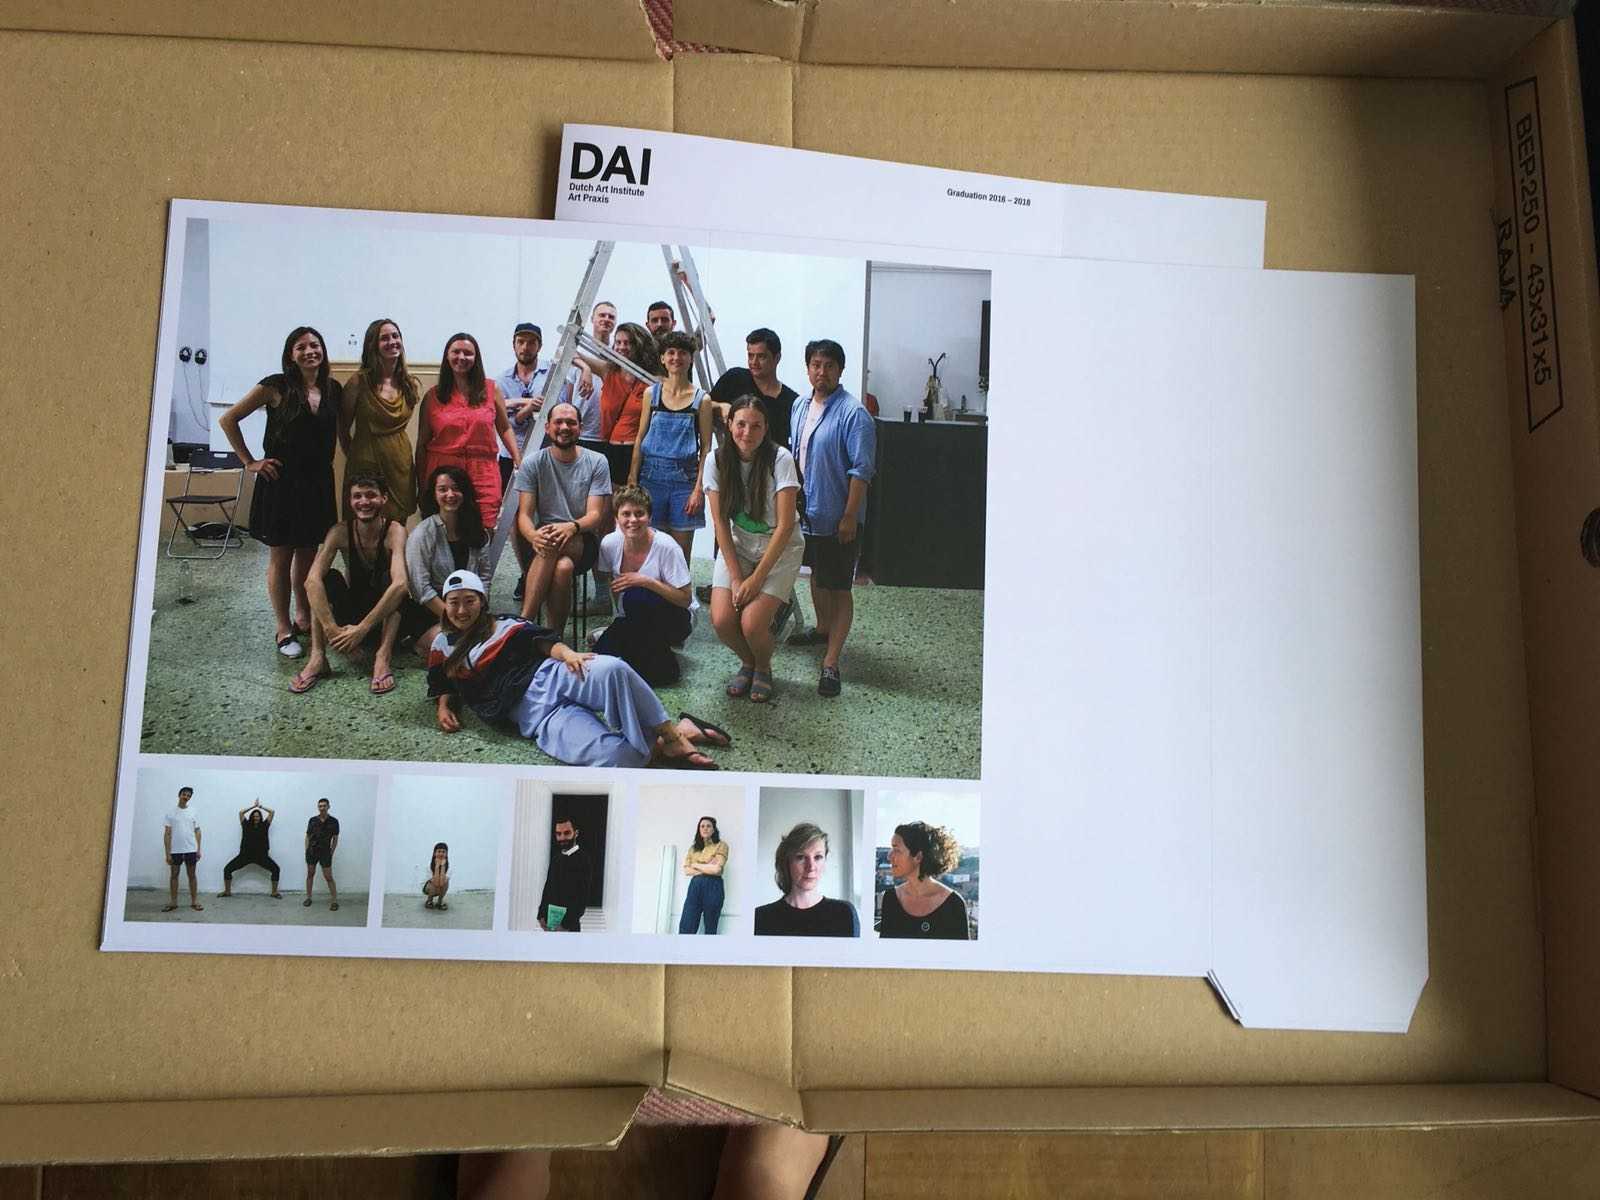 DAI Graduation Booklet 2018 in the making. Design: Lauren Alexander & Hanna Rullmann.Group portrait: Silvia Ulloa for DAI in Athens, May 2018.